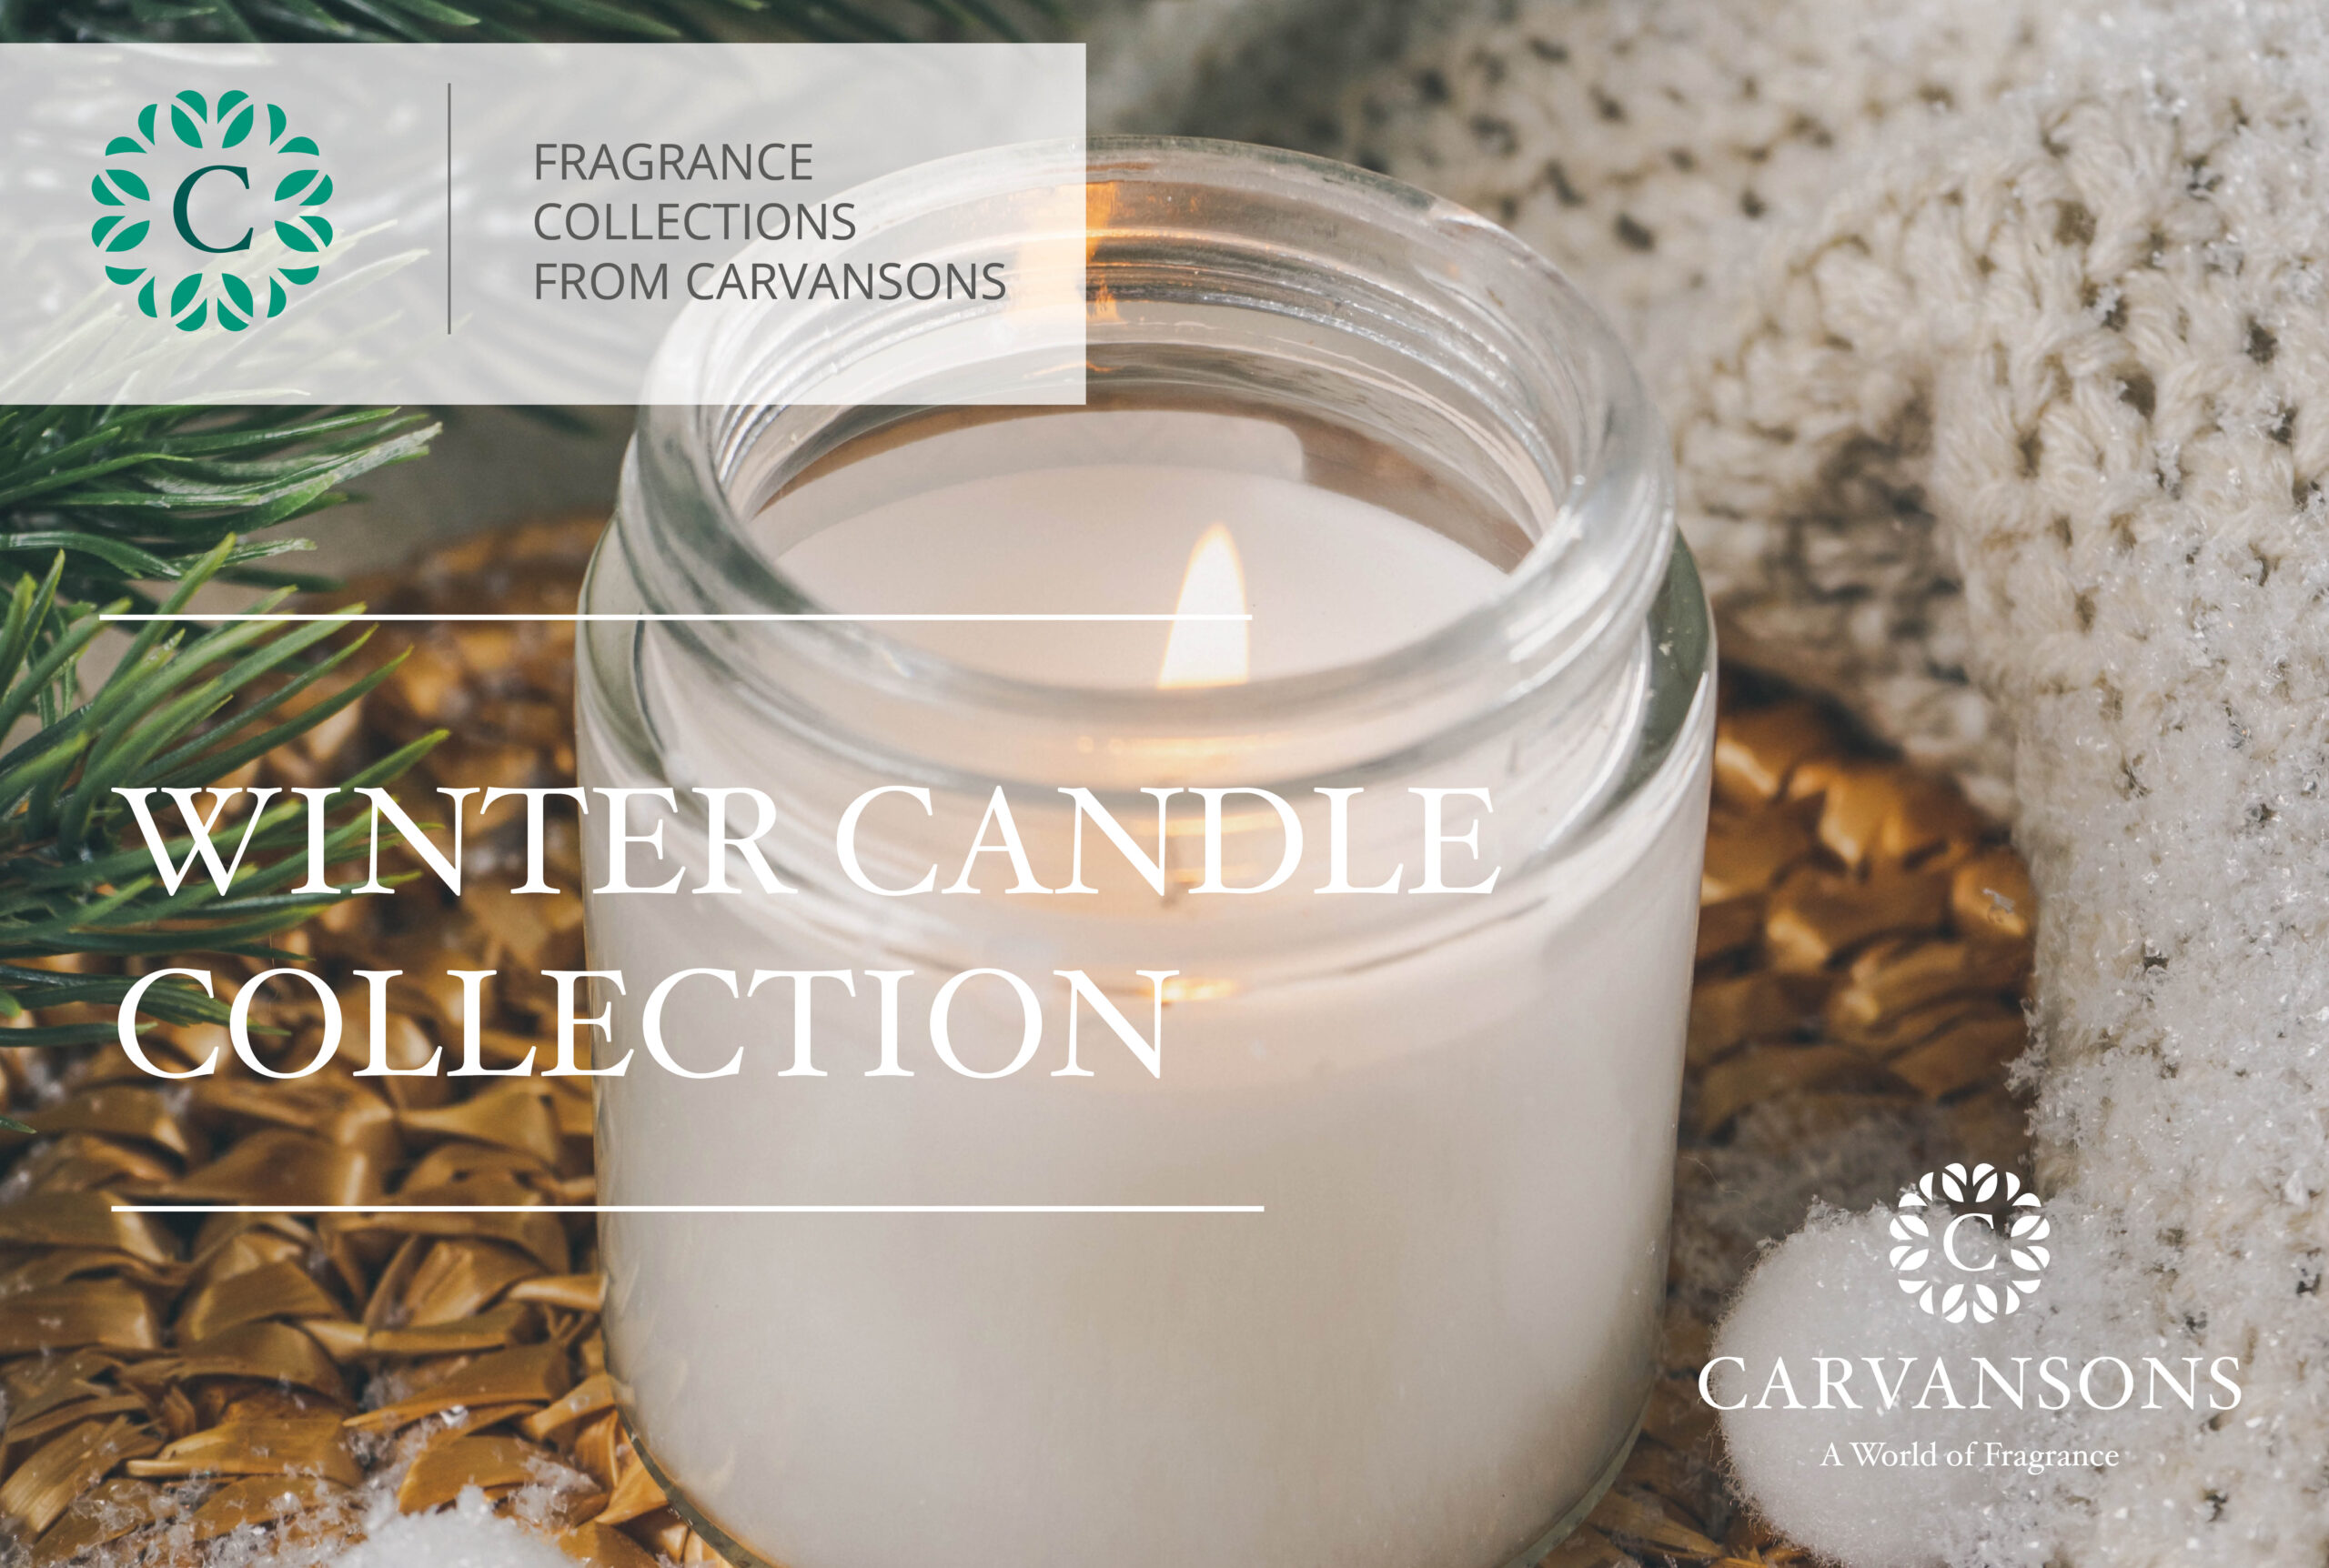 Winter Candle Fragrance Collection - Carvansons